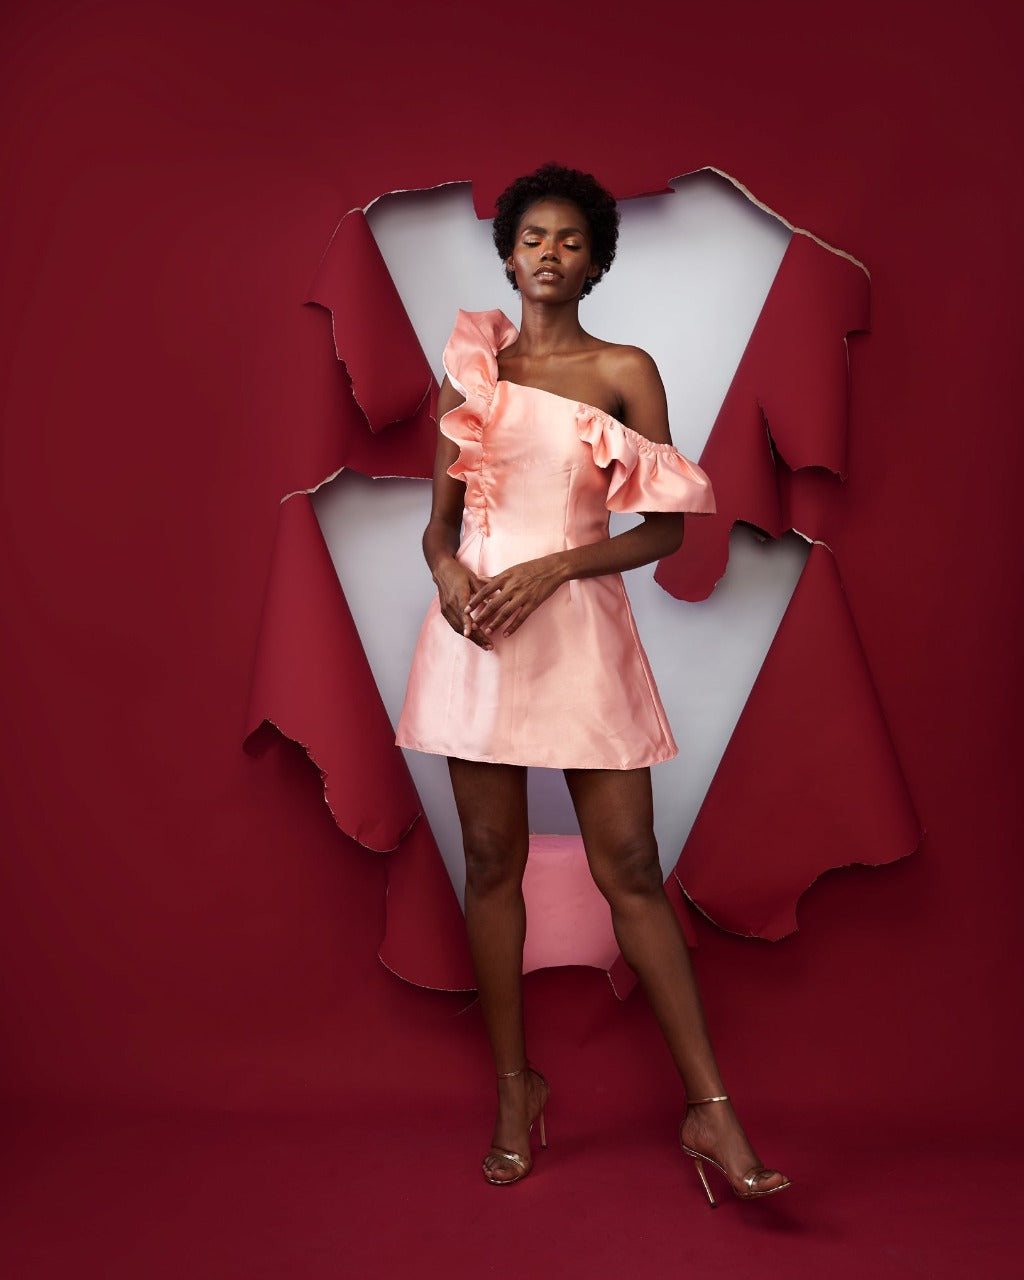 A model wearing a peach colored dress in a red room